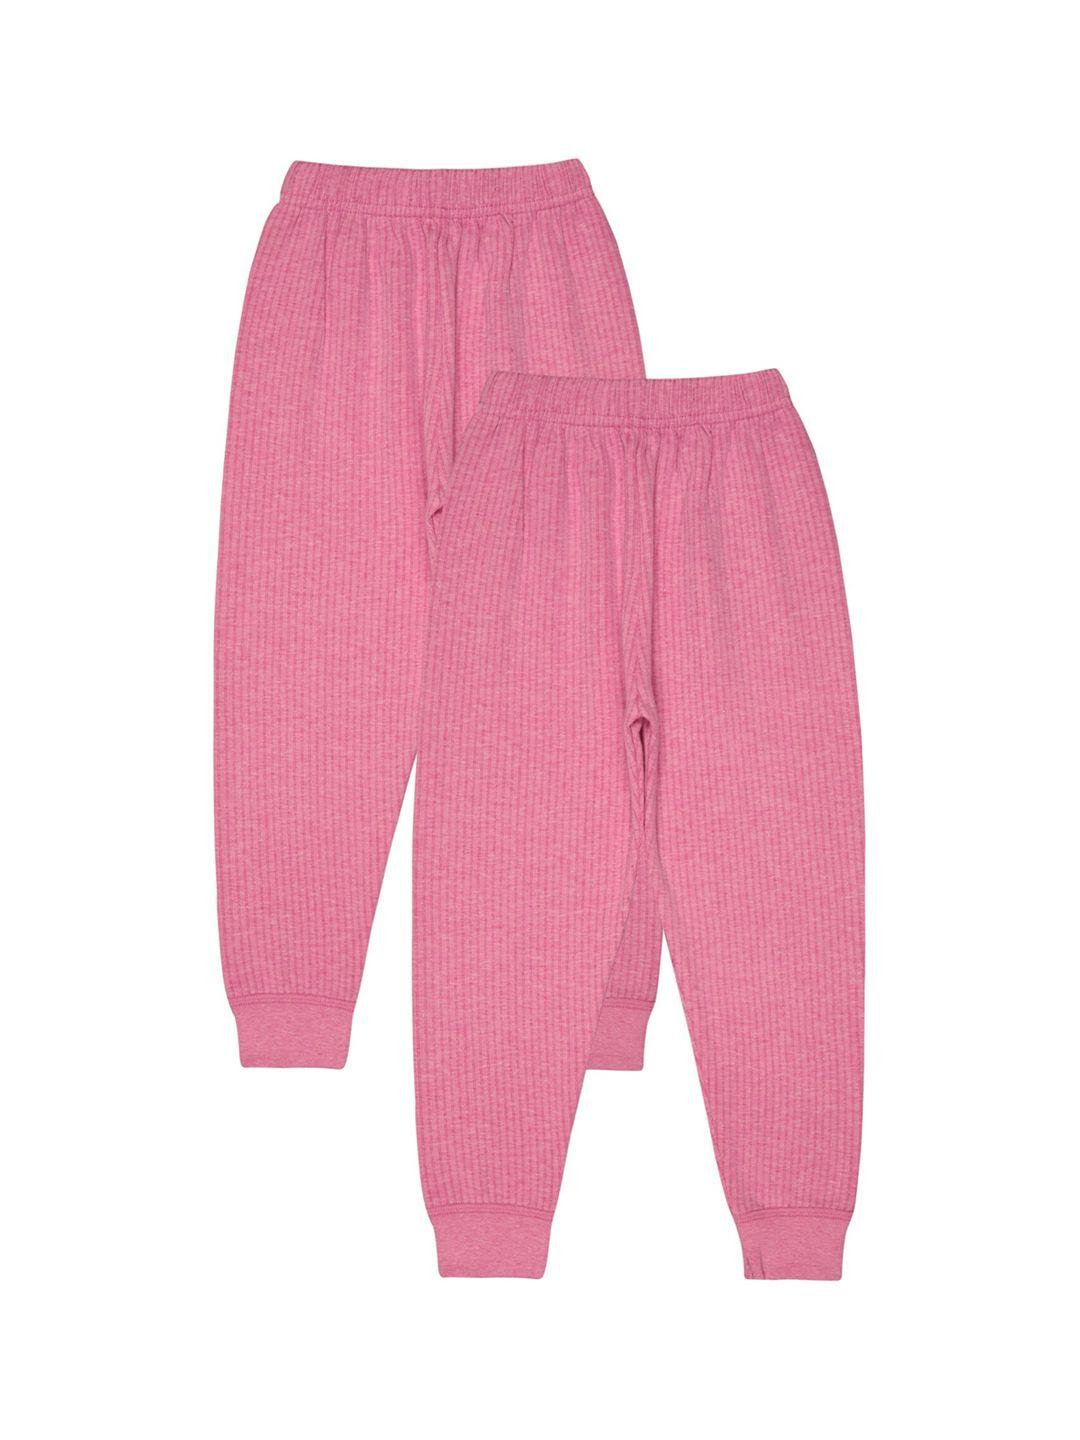 bodycare insider kids pack of 2 ribbed thermal bottoms